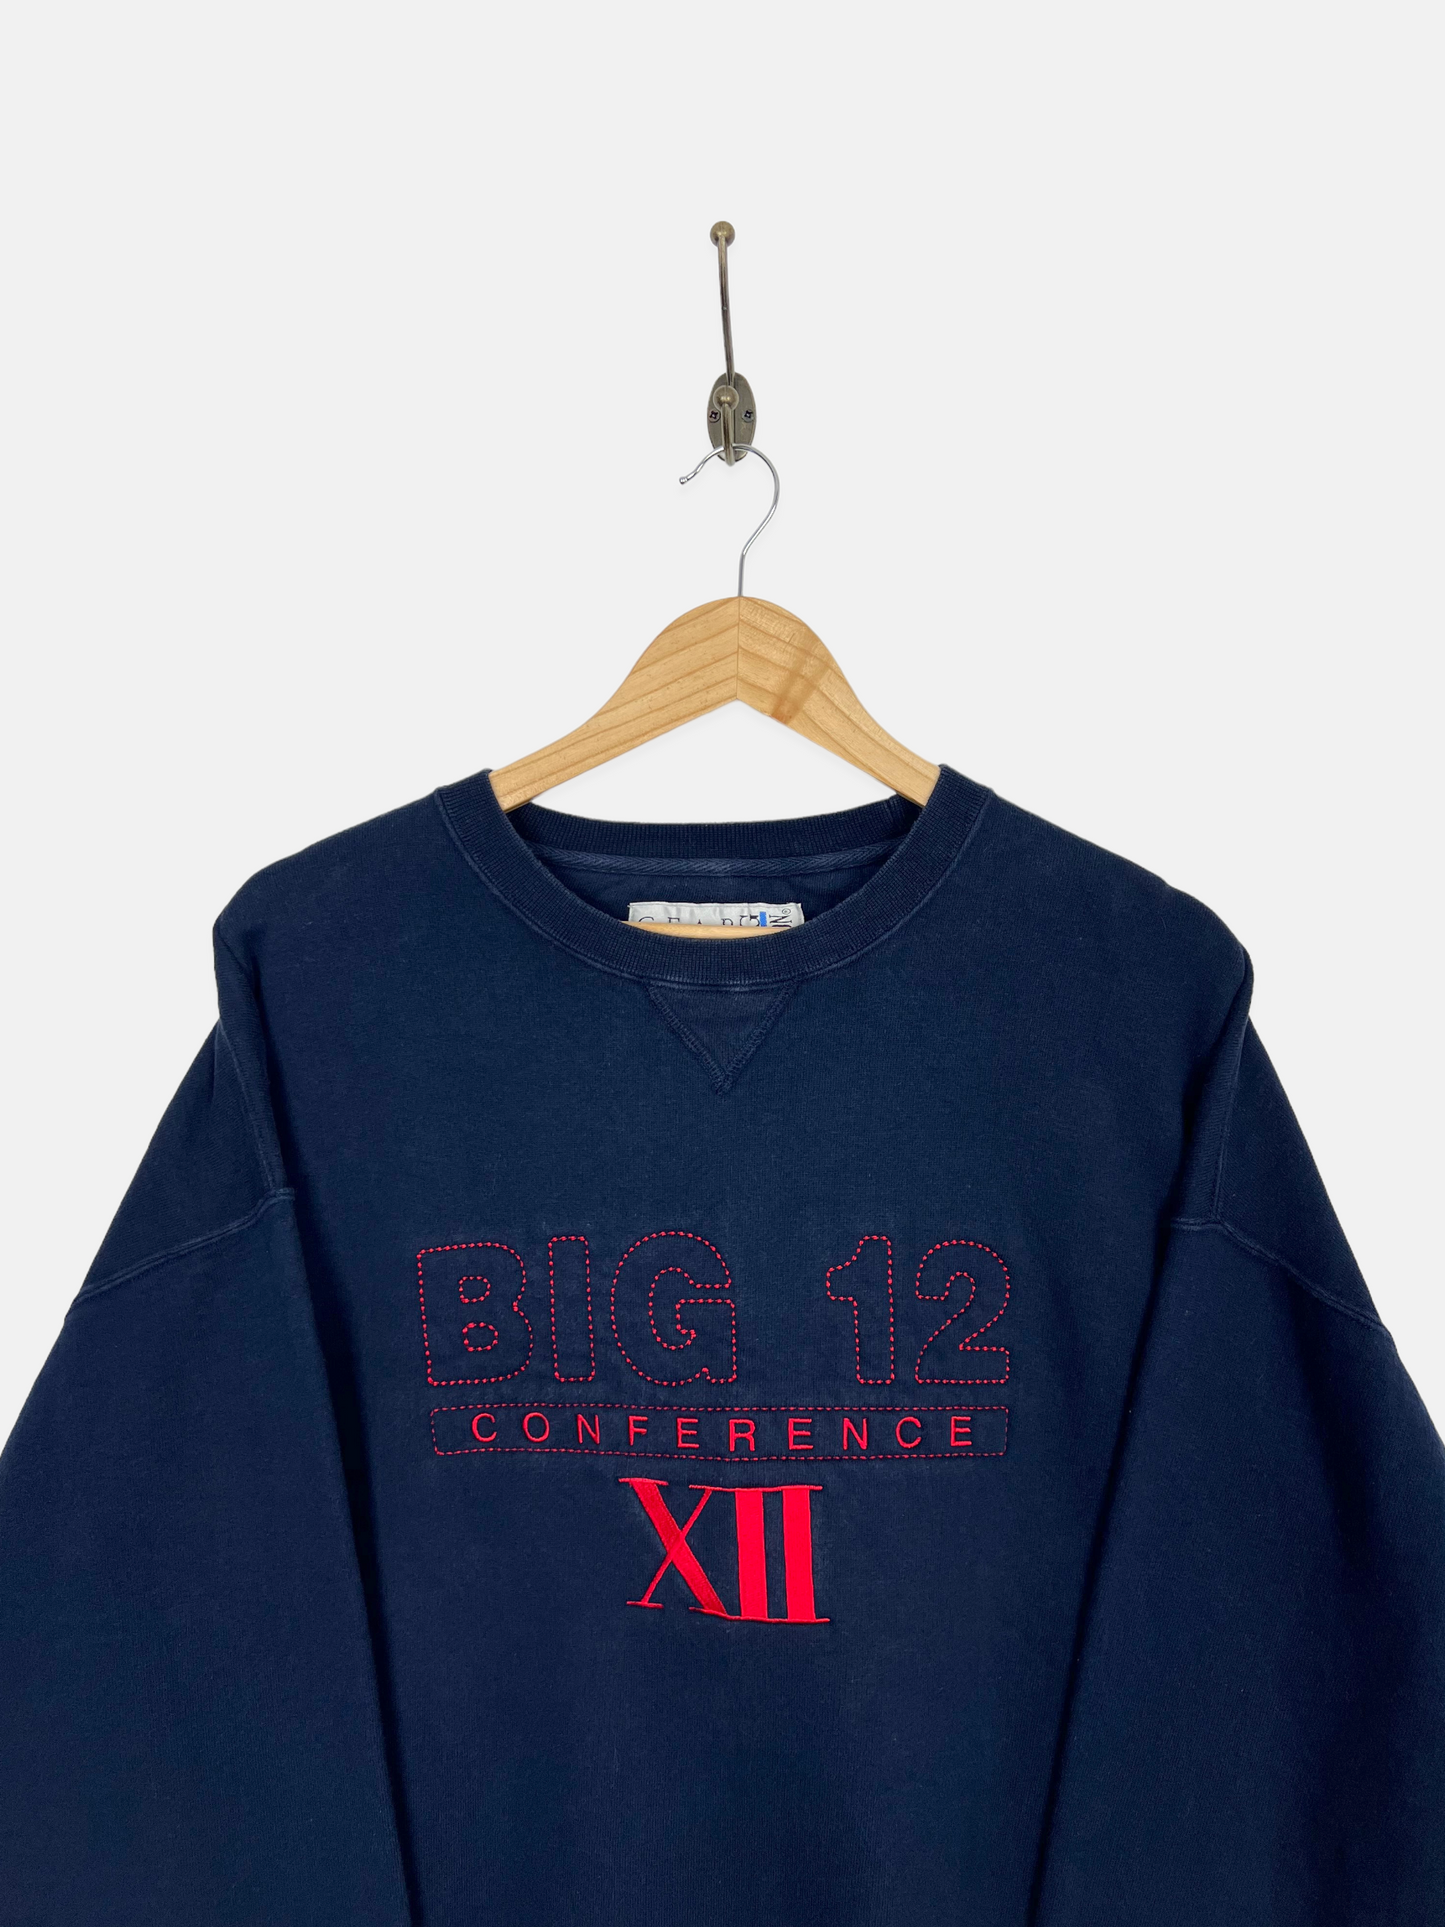 90's Big 12 Conference XII Embroidered Vintage Sweatshirt Size L-XL